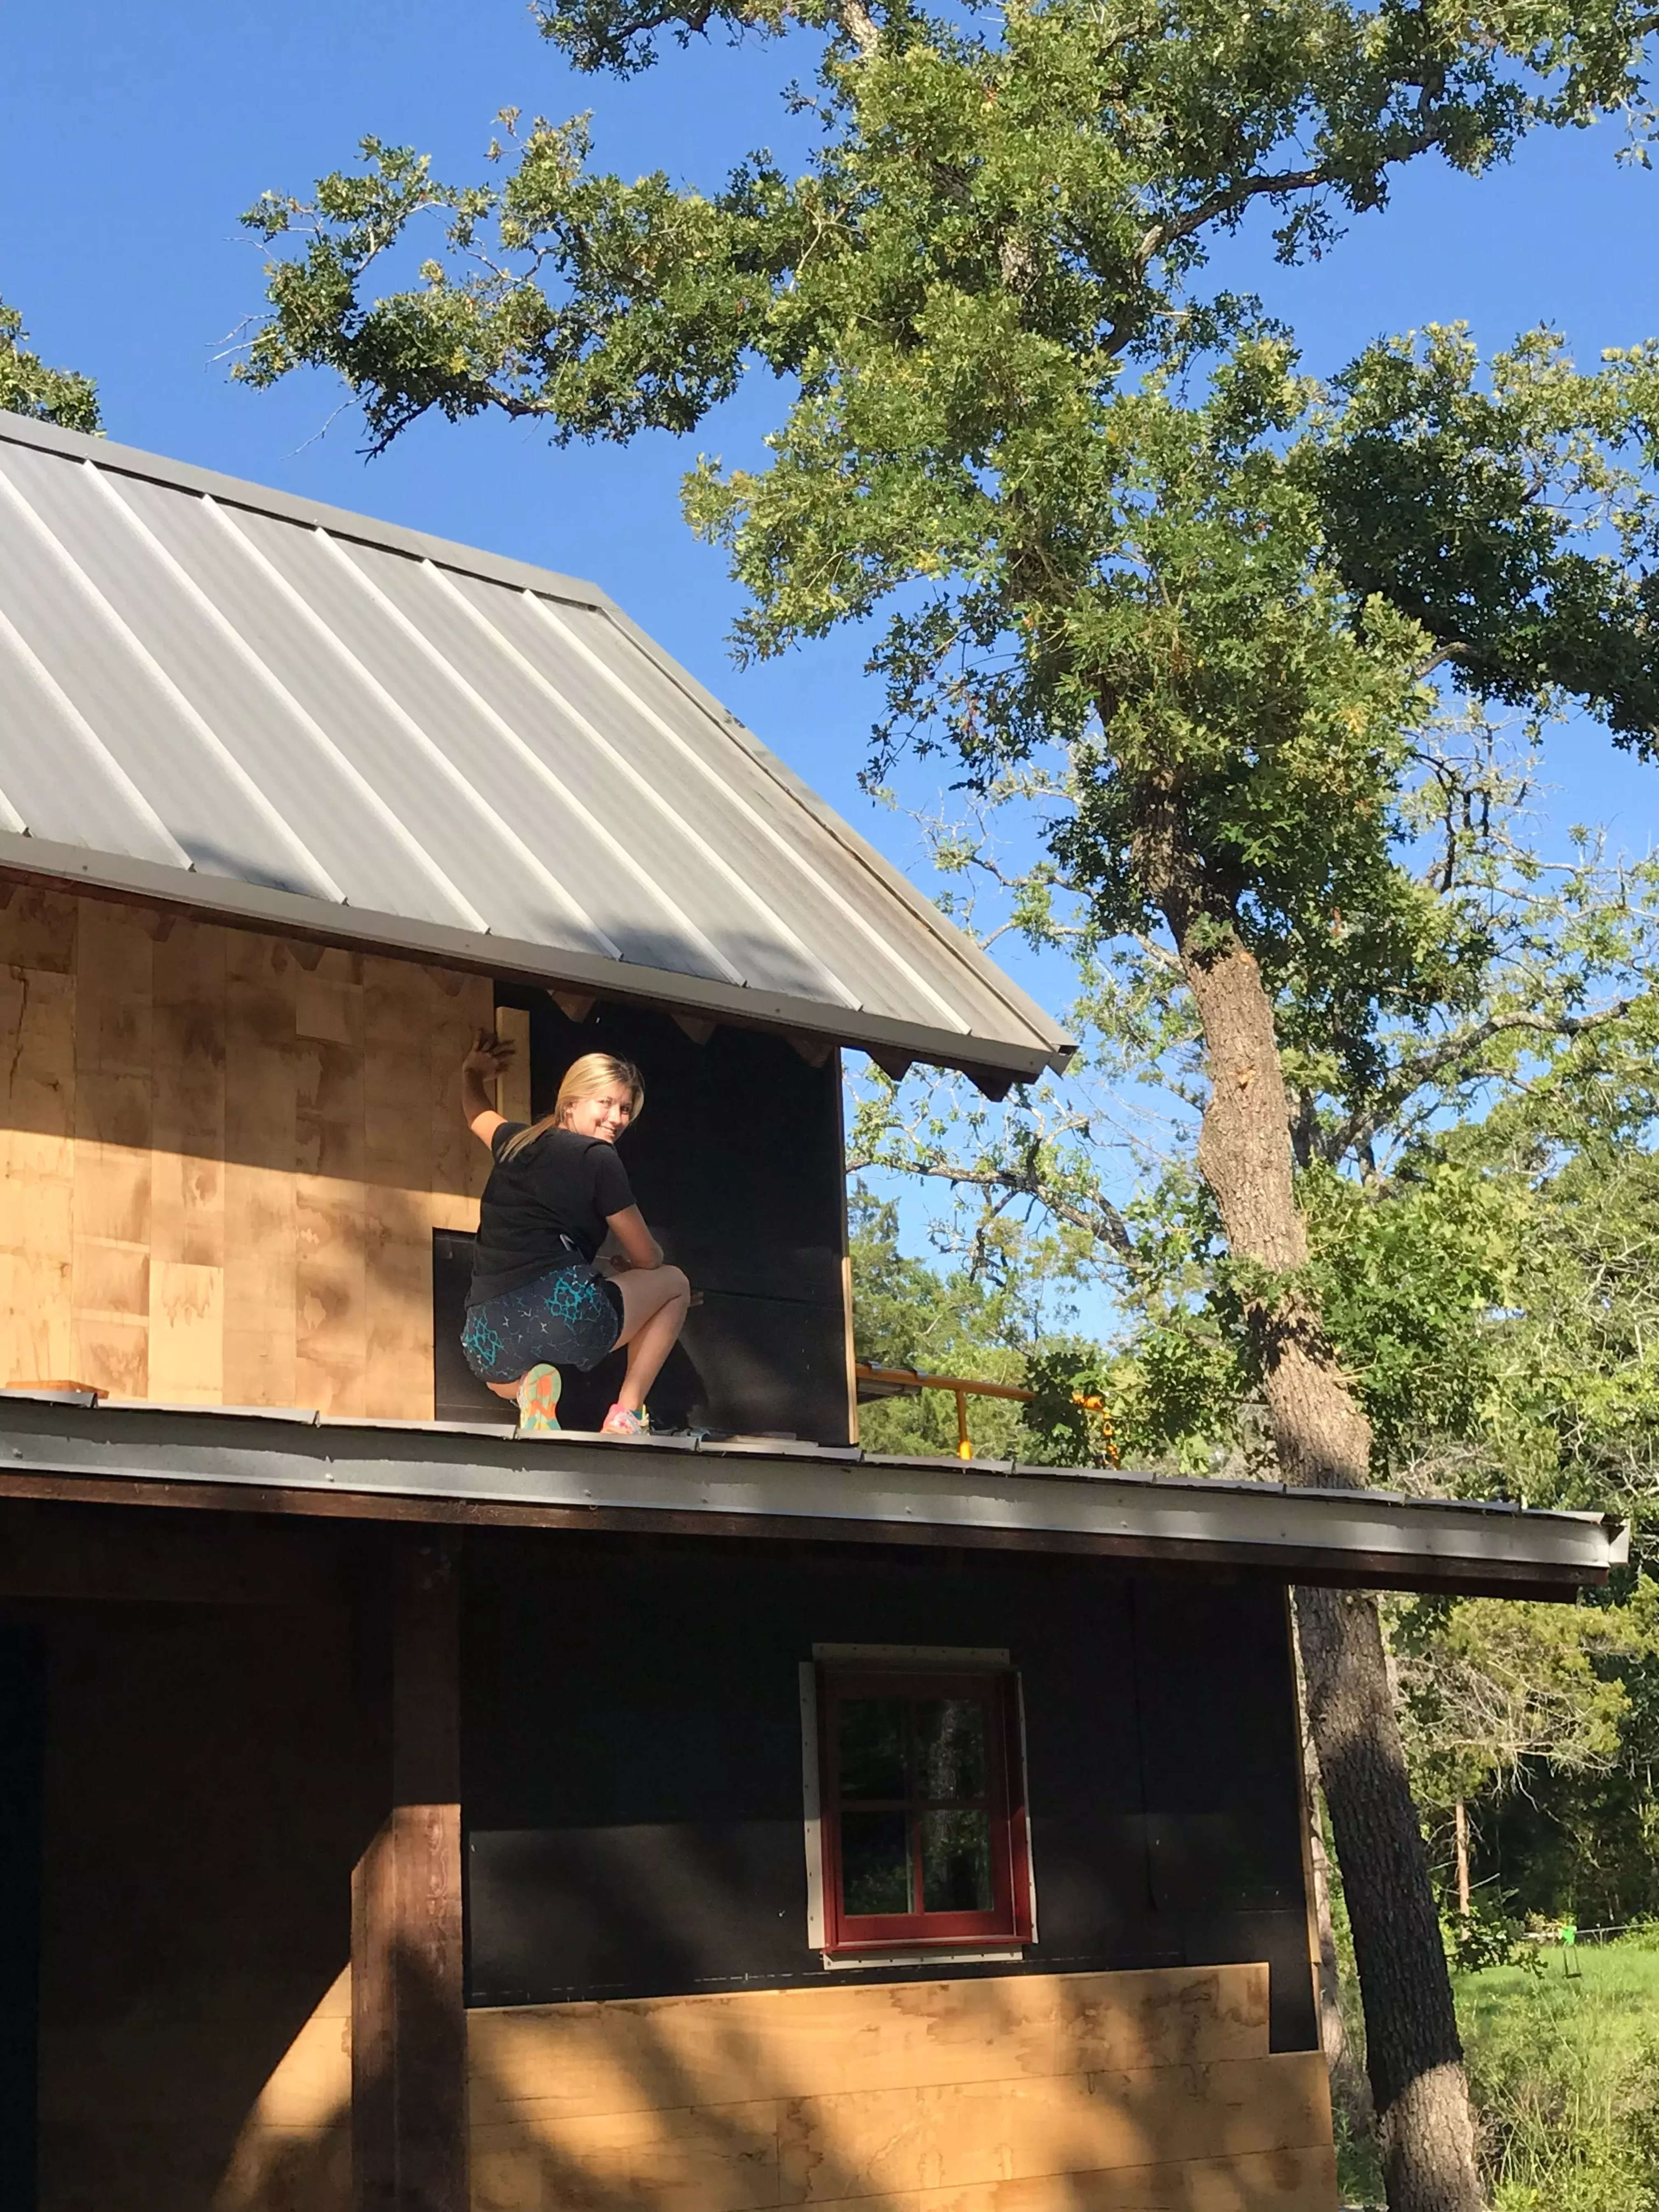 Mckean Matson building her tiny home.